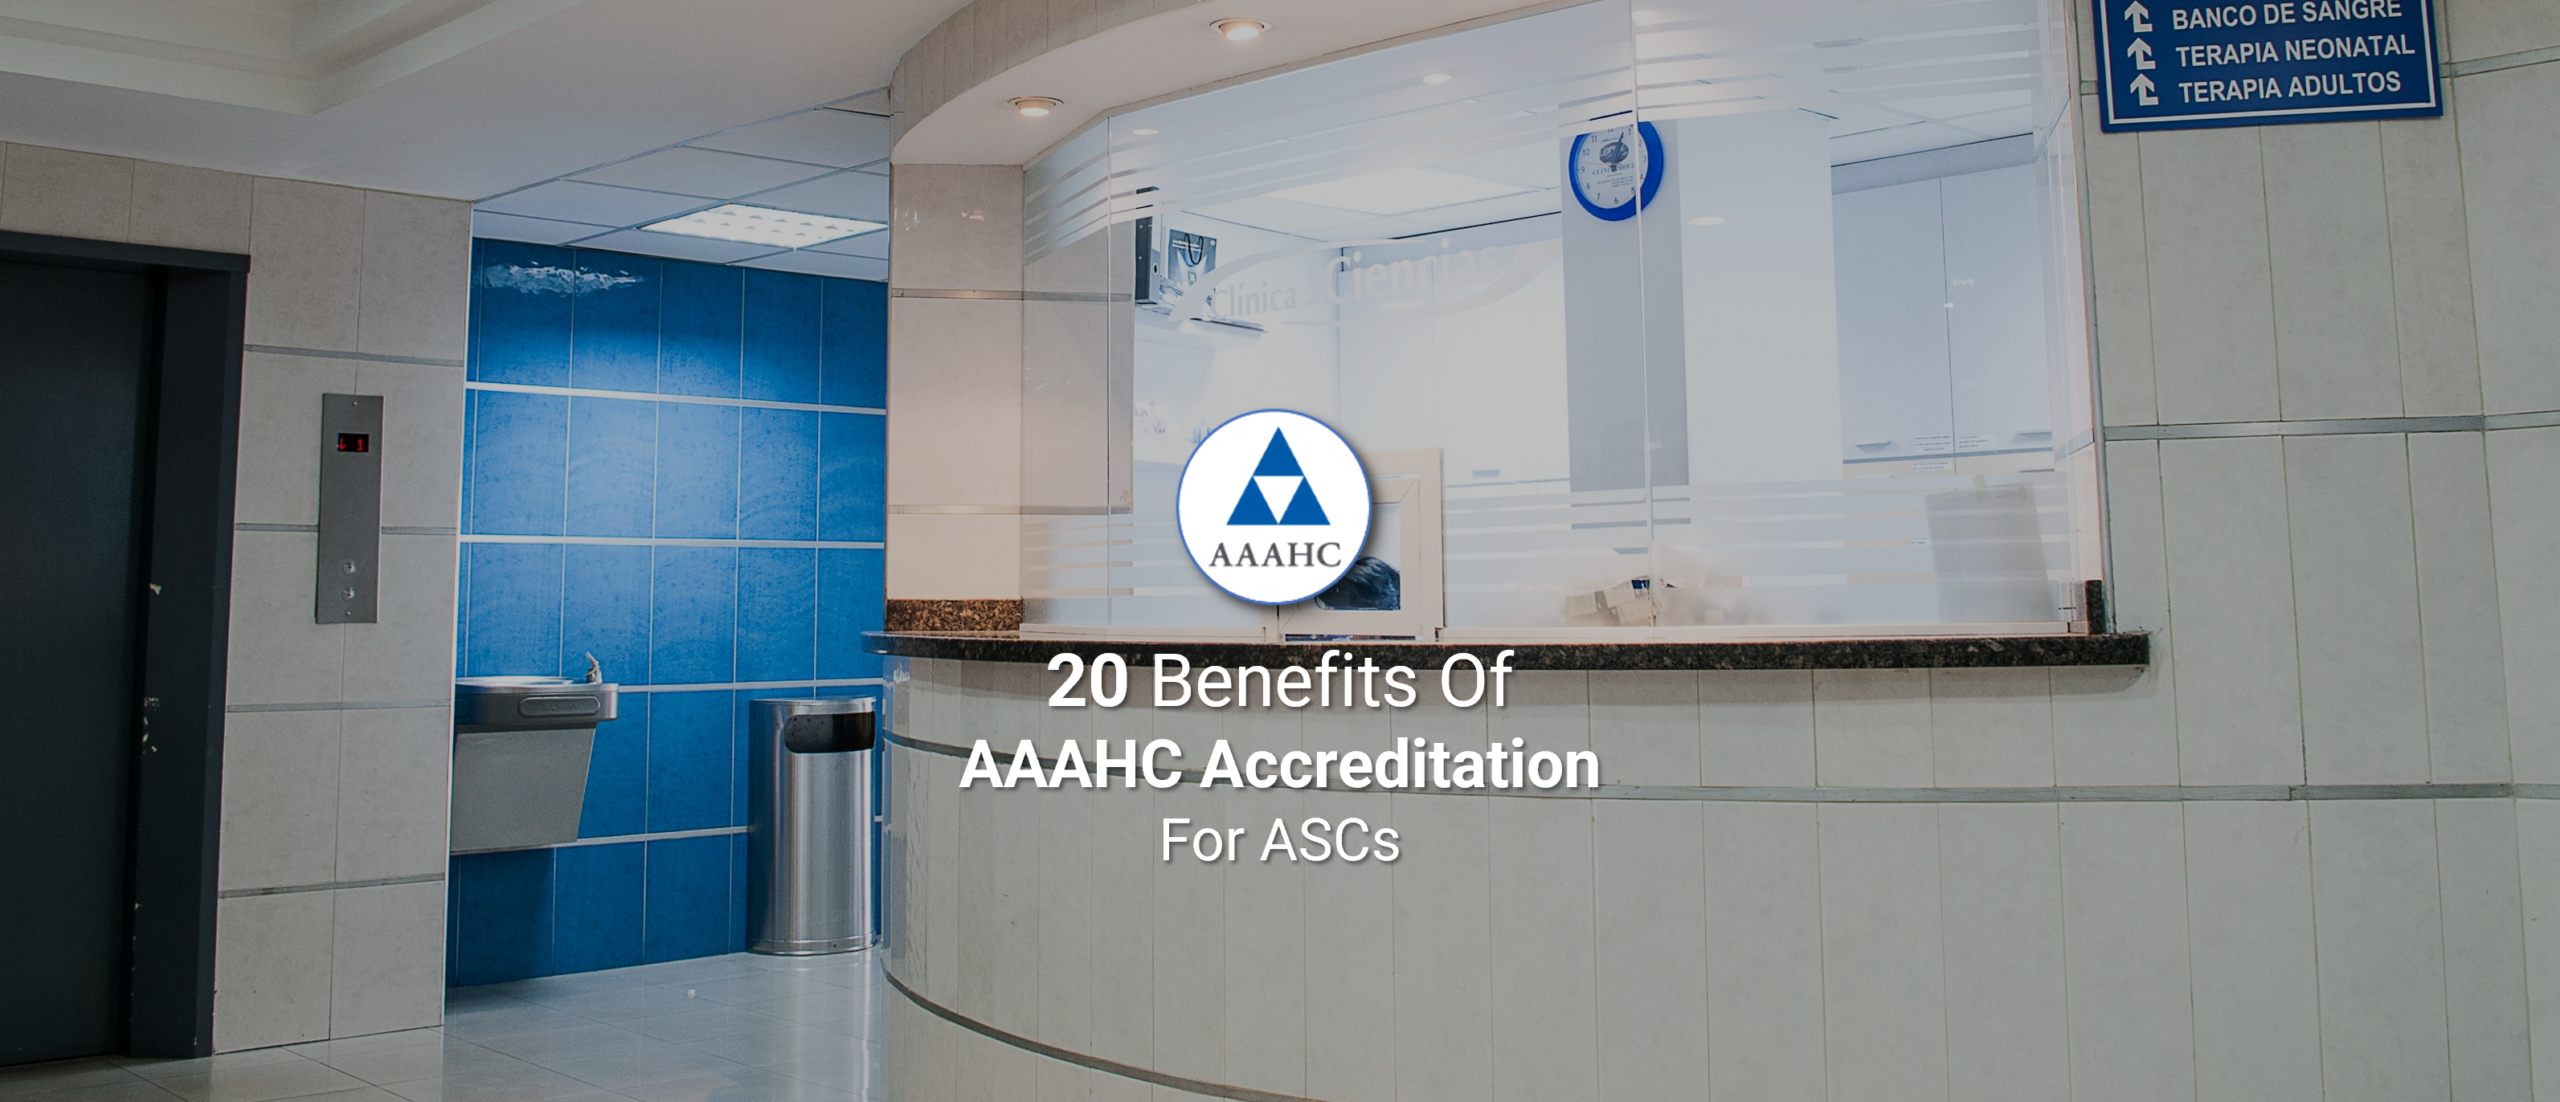 20 AAAHC Accreditation Benefits For ASCs